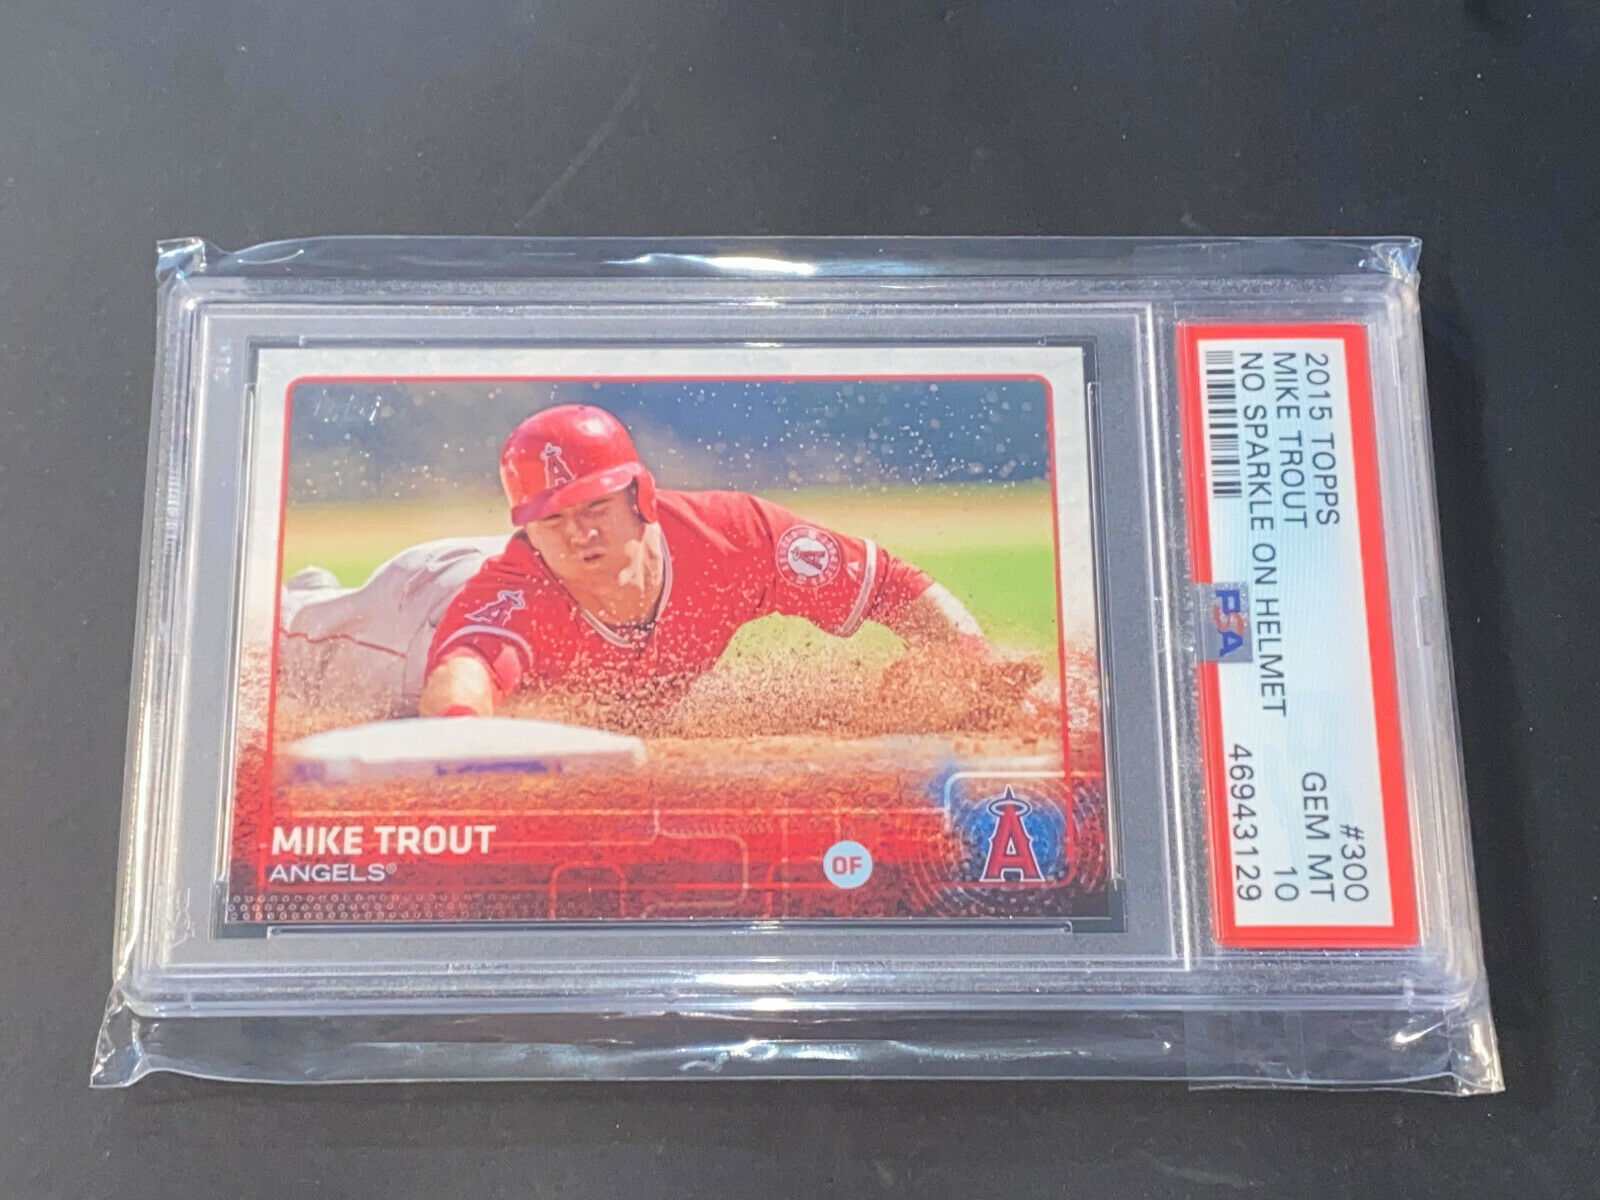 Mike Trout Los Angeles Angels 2015 Topps Card PSA 10 Mint -